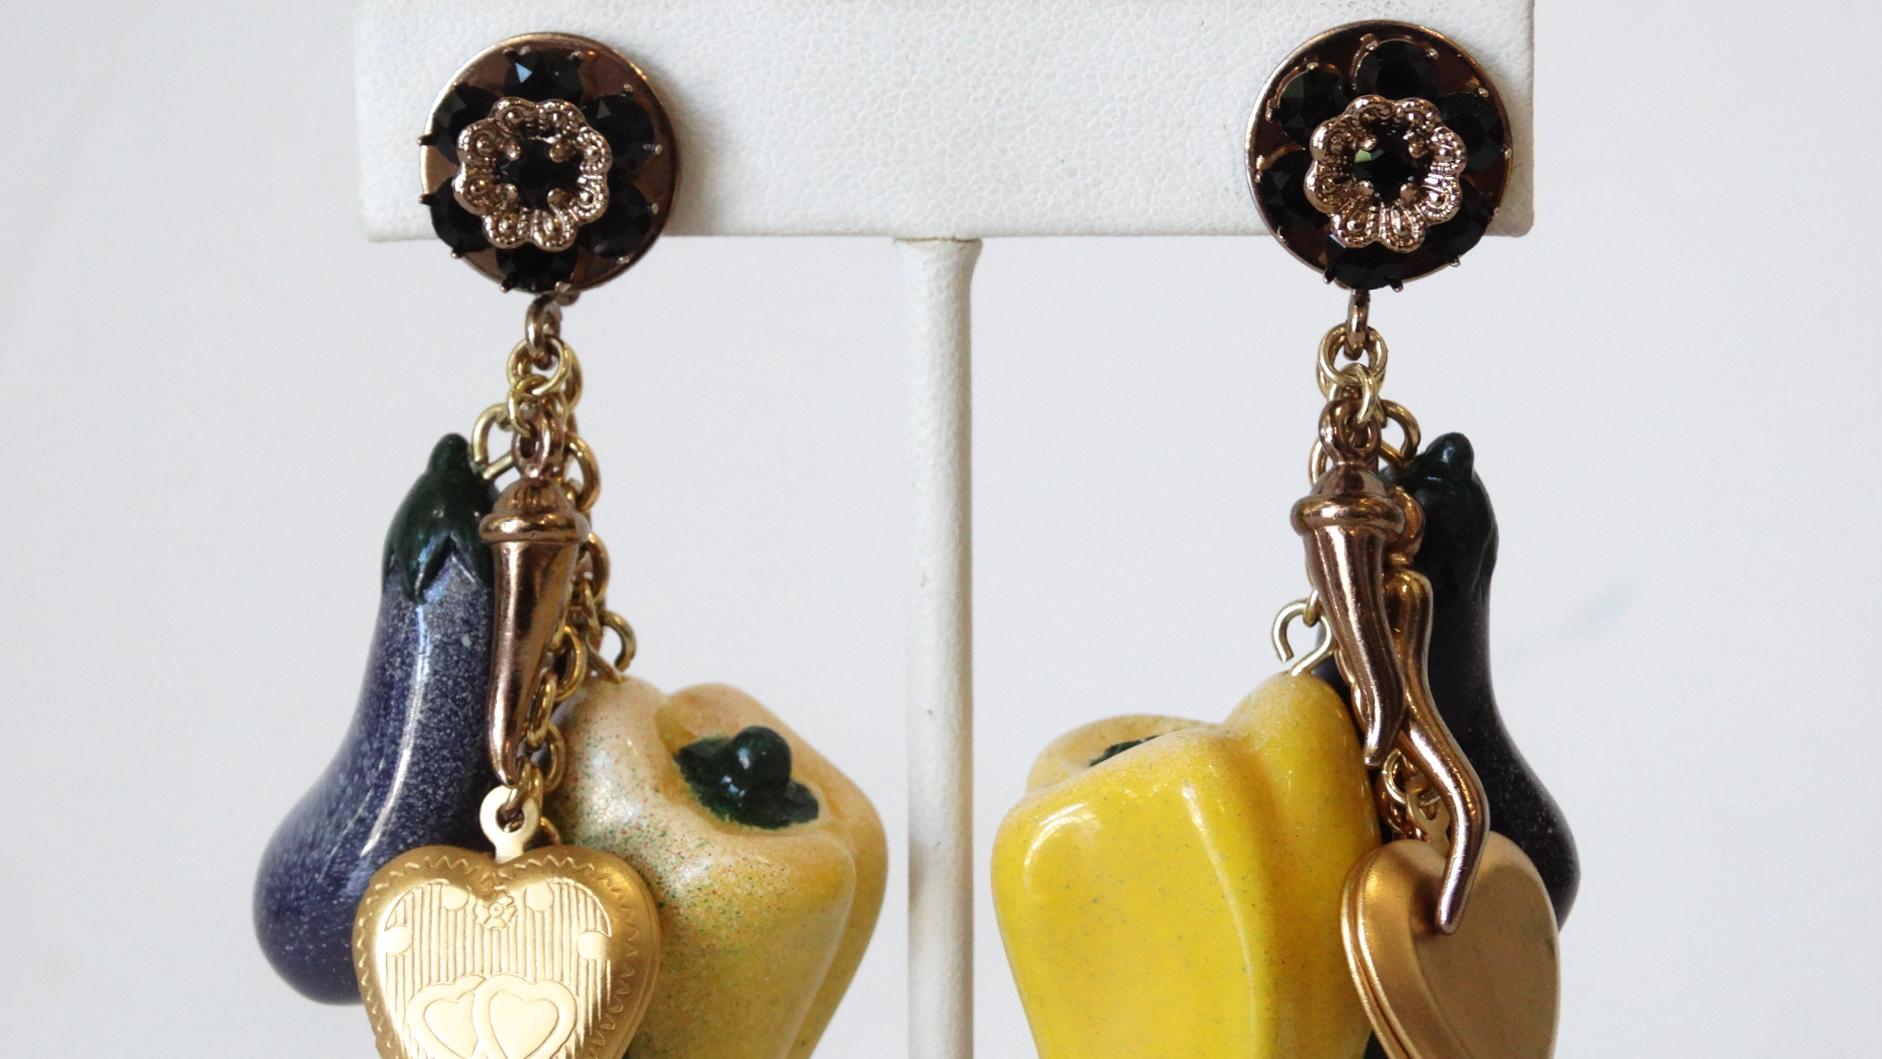 Spring 2012 Dolce & Gabbana Clip On Earrings  In Excellent Condition For Sale In Scottsdale, AZ